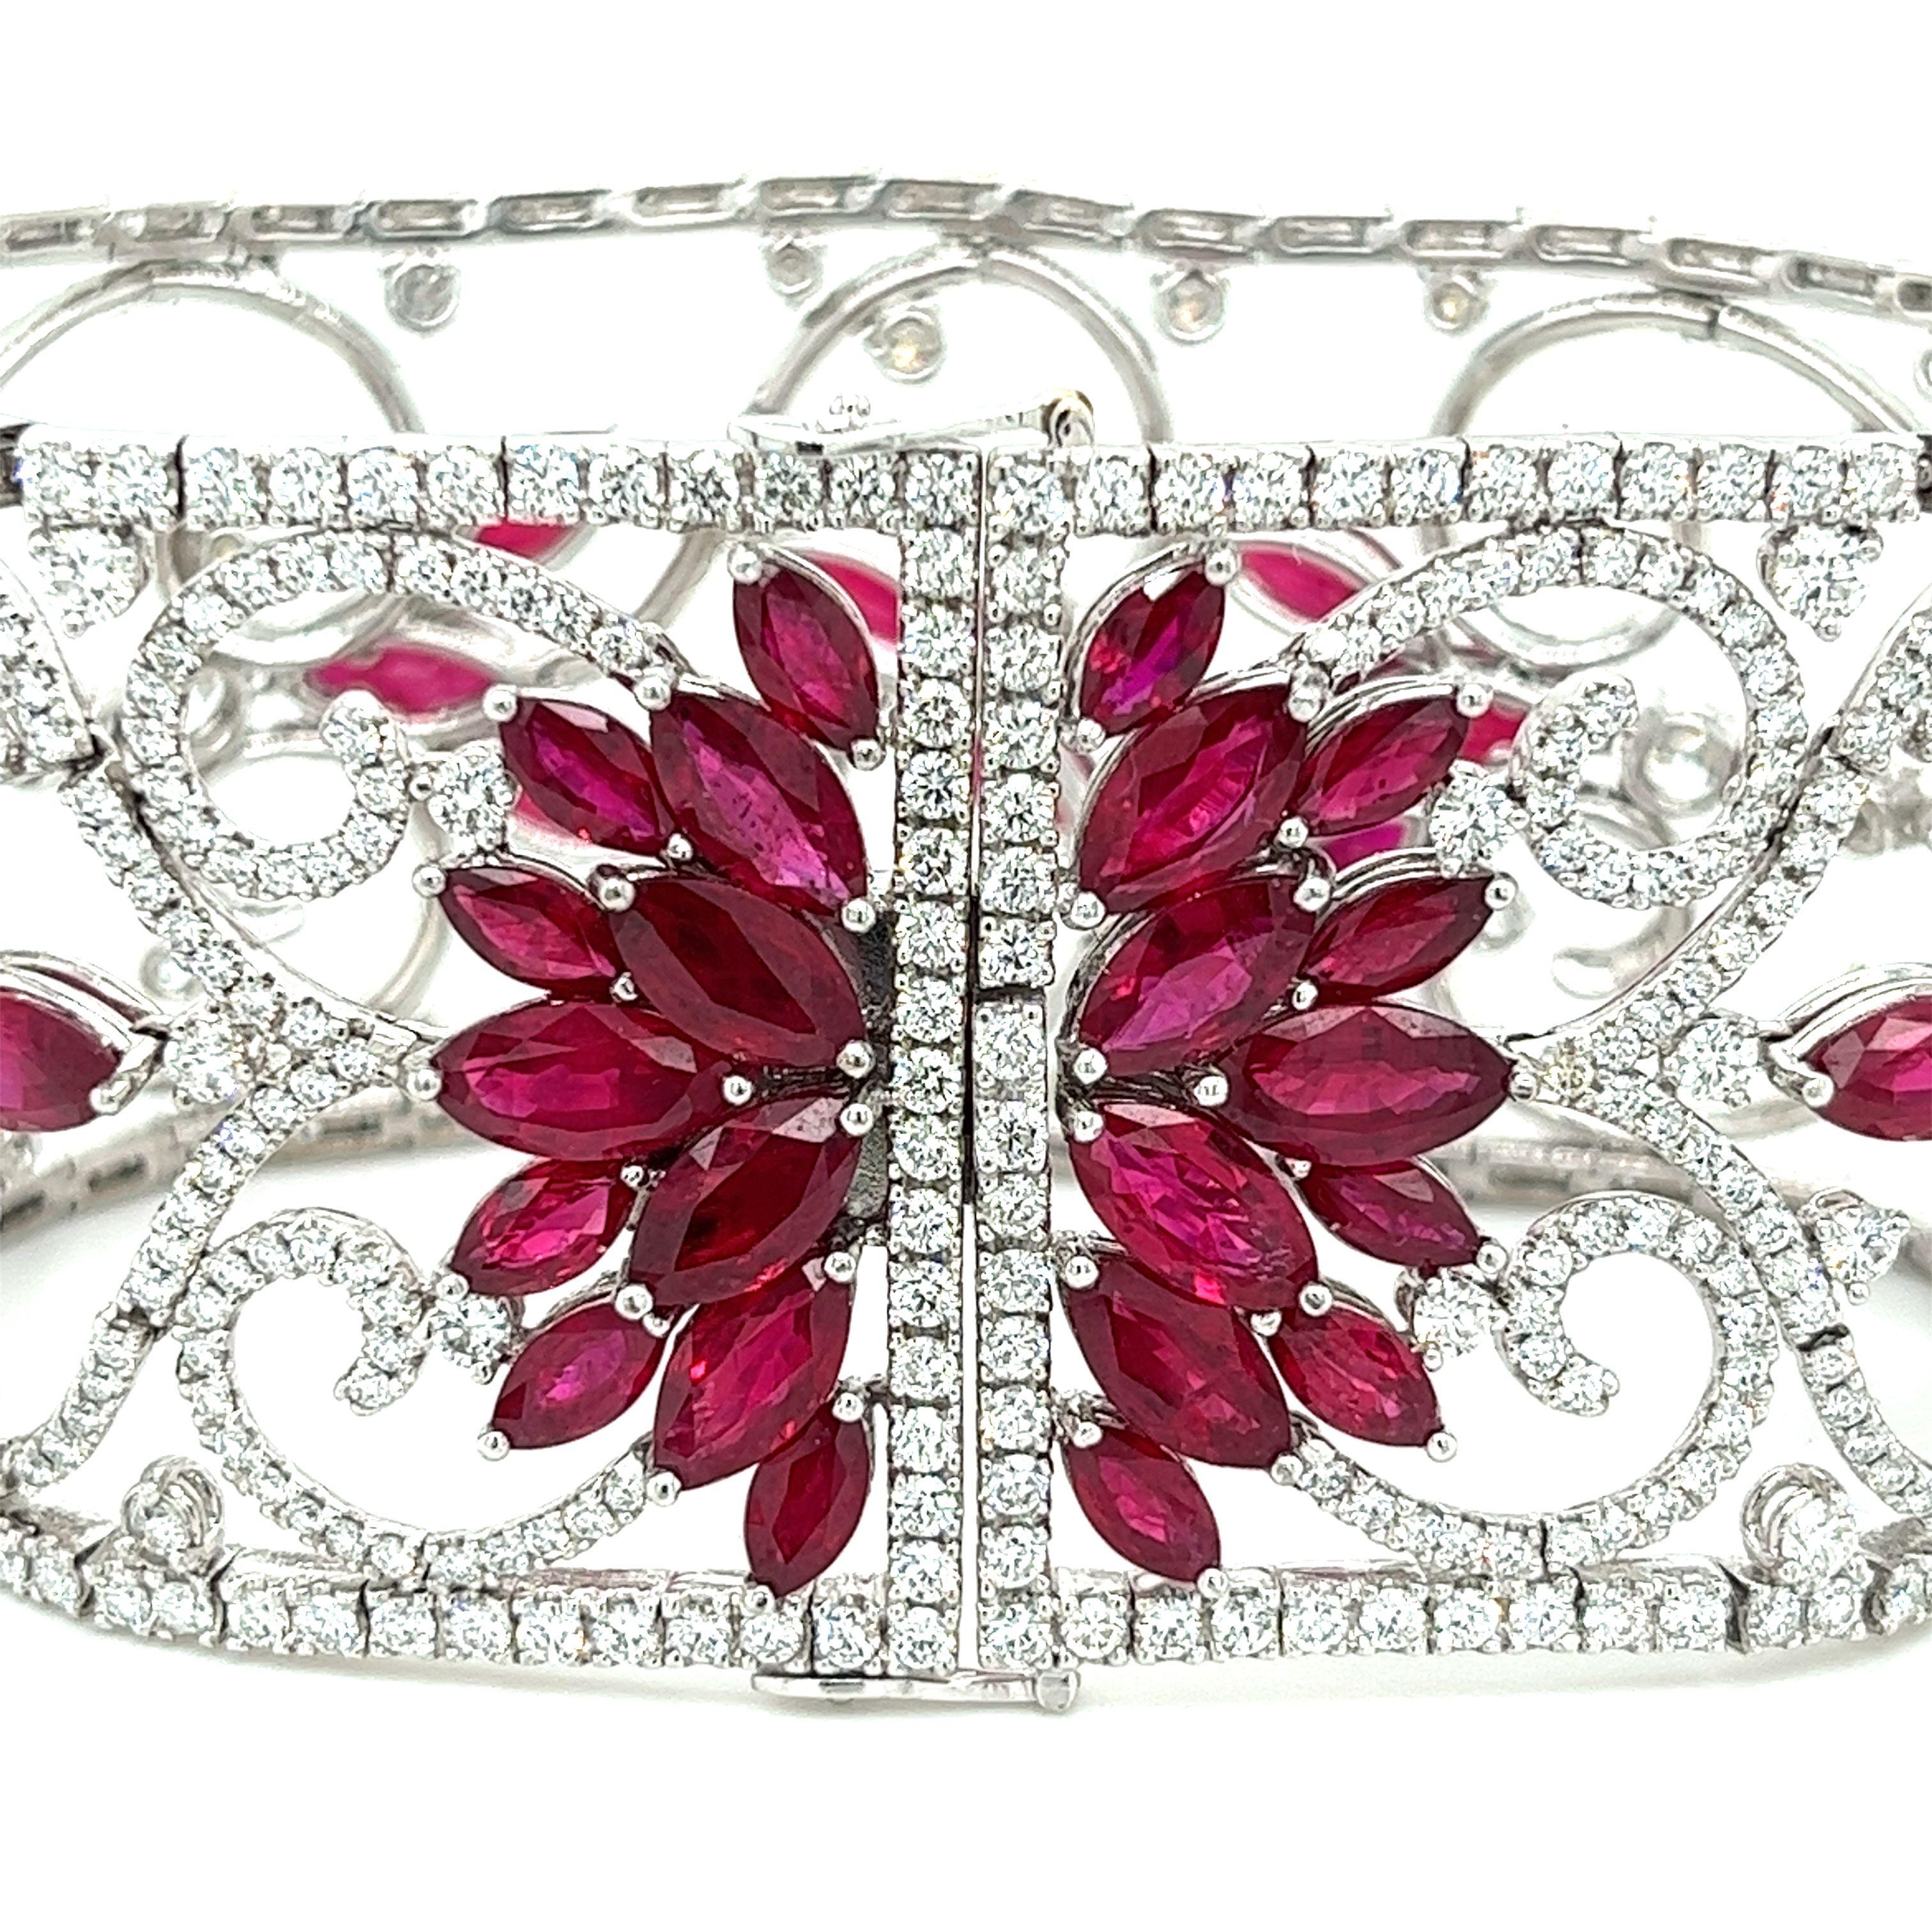 Experience the unmatched beauty and sophistication of this Art Deco style ruby and diamond filigree bracelet. Meticulously crafted with timeless elegance, this luxurious piece showcases 35 carats of rubies and 11 carats of diamonds set in a dynamic